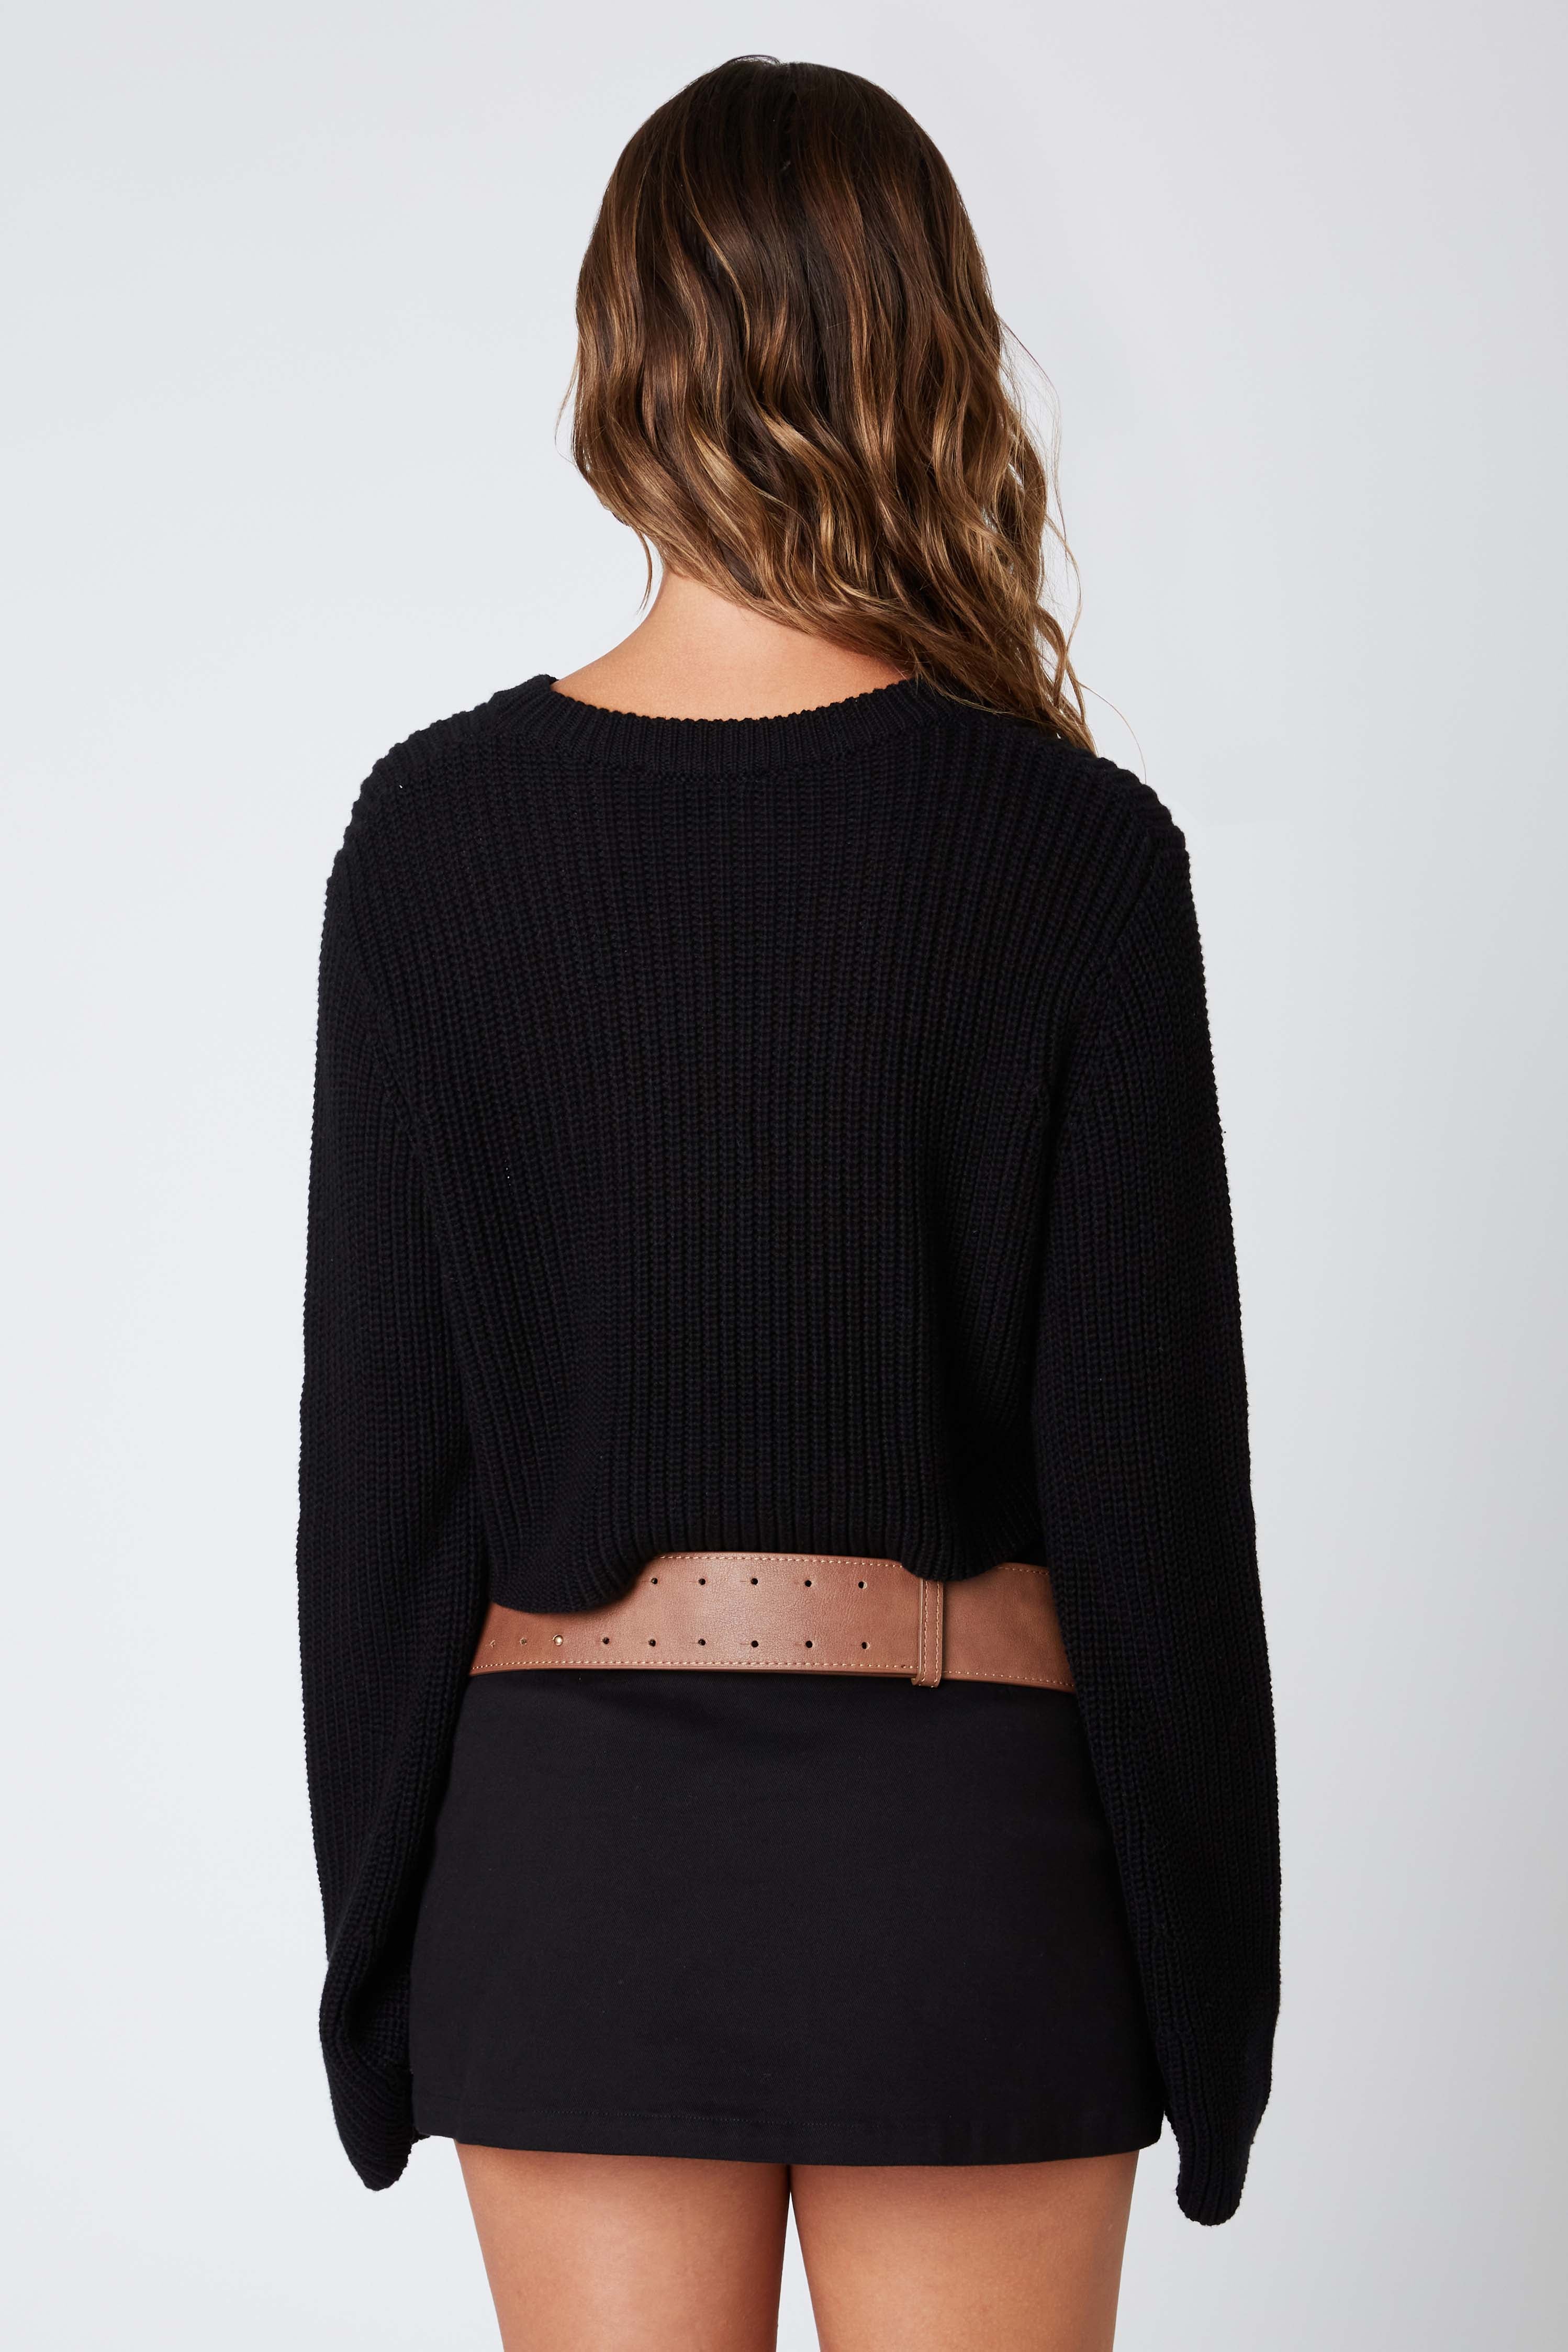 Knit Cropped Sweater Top in Black Back View